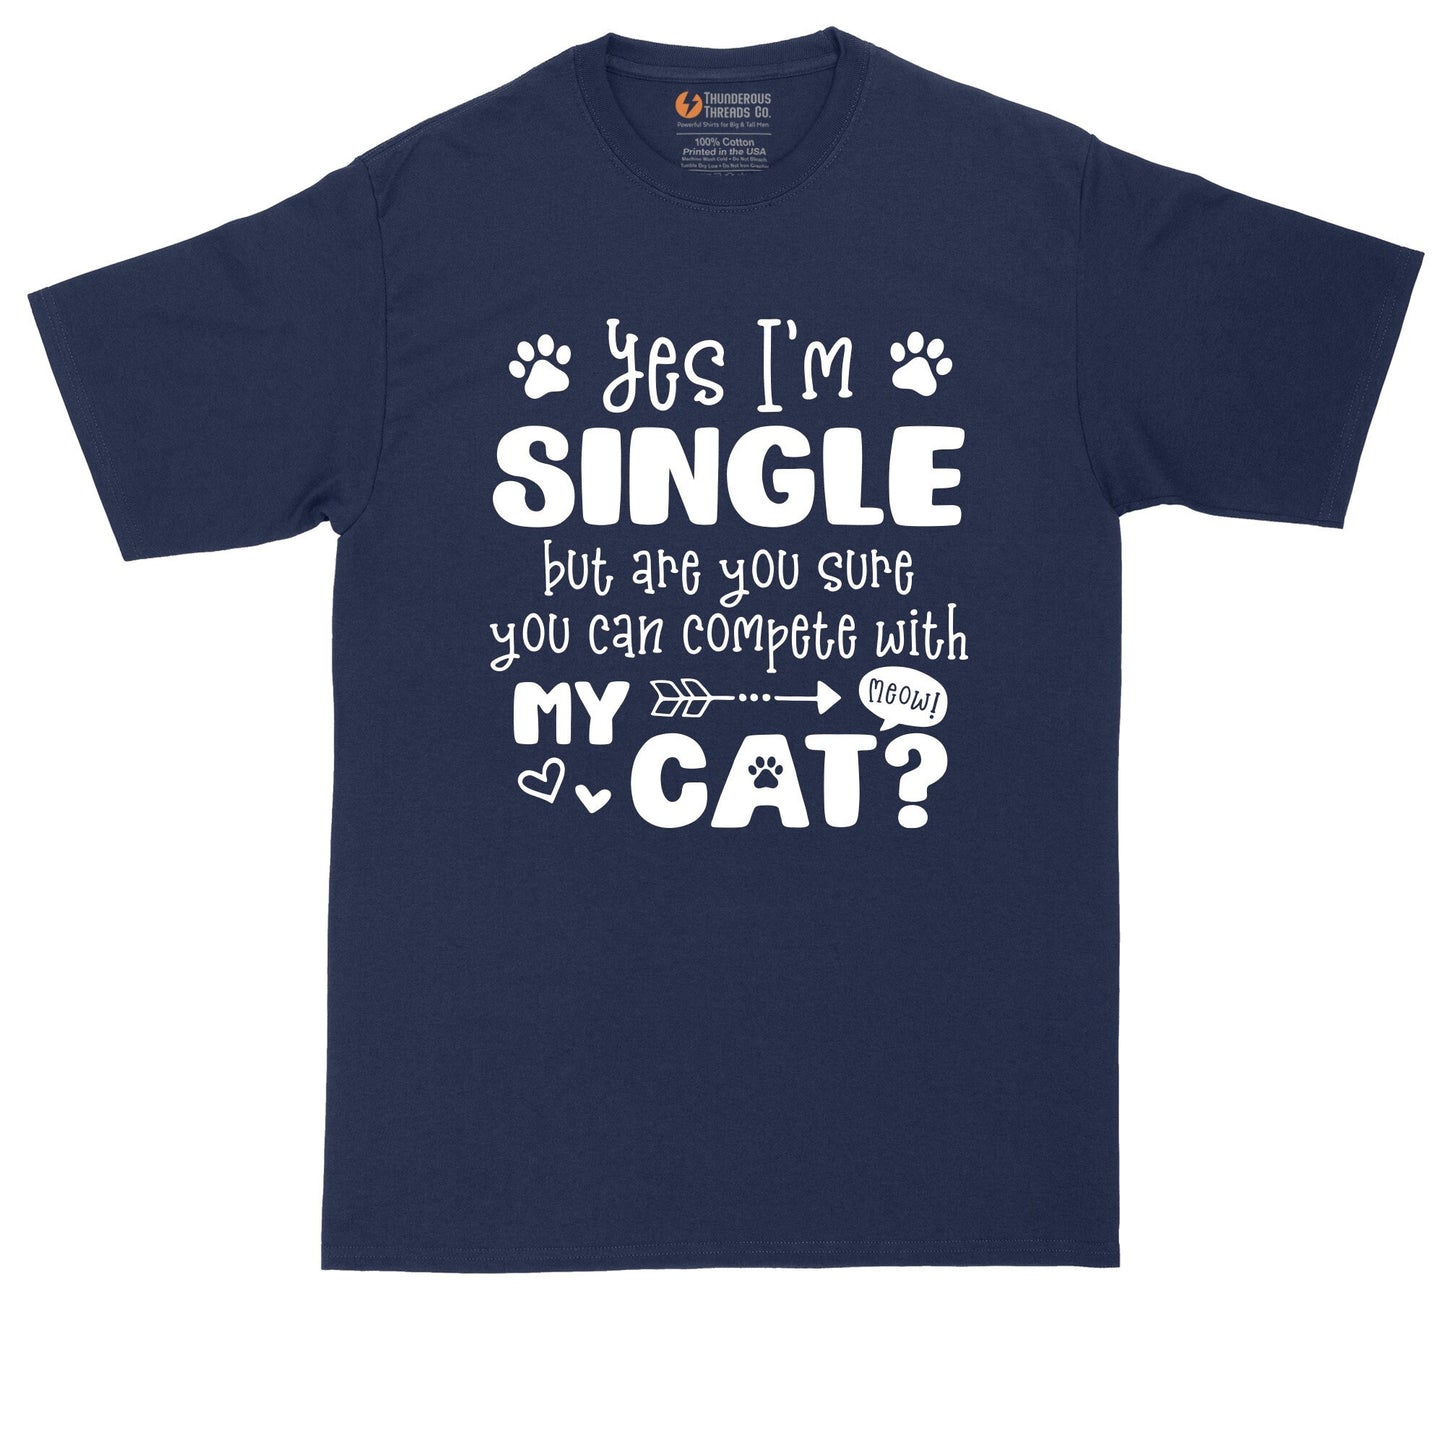 Yes I'm Single But Are You Sure You Can Compete With My Cat | Mens Big & Tall T-Shirt